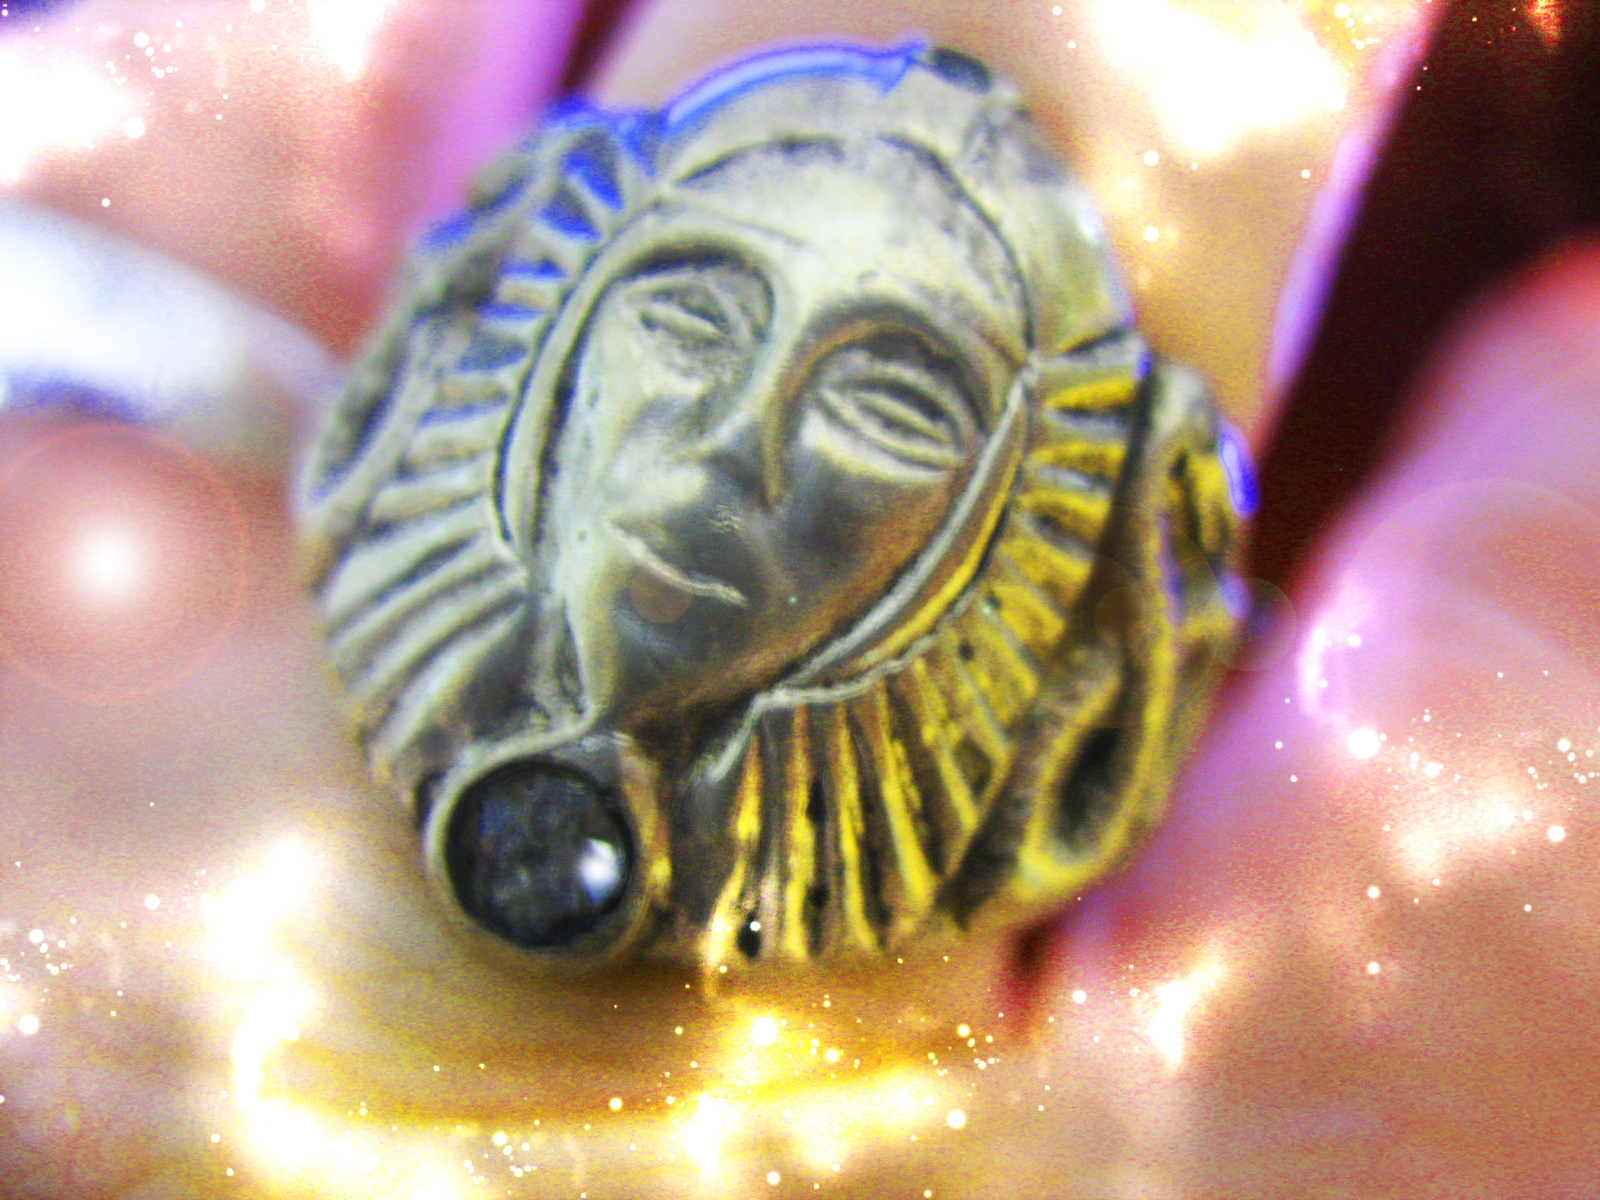 Primary image for HAUNTED ANTIQUE RING UNLOCK PHARAOH'S GIFTS WEALTH LUCK HIGHEST LIGHT MAGICK 